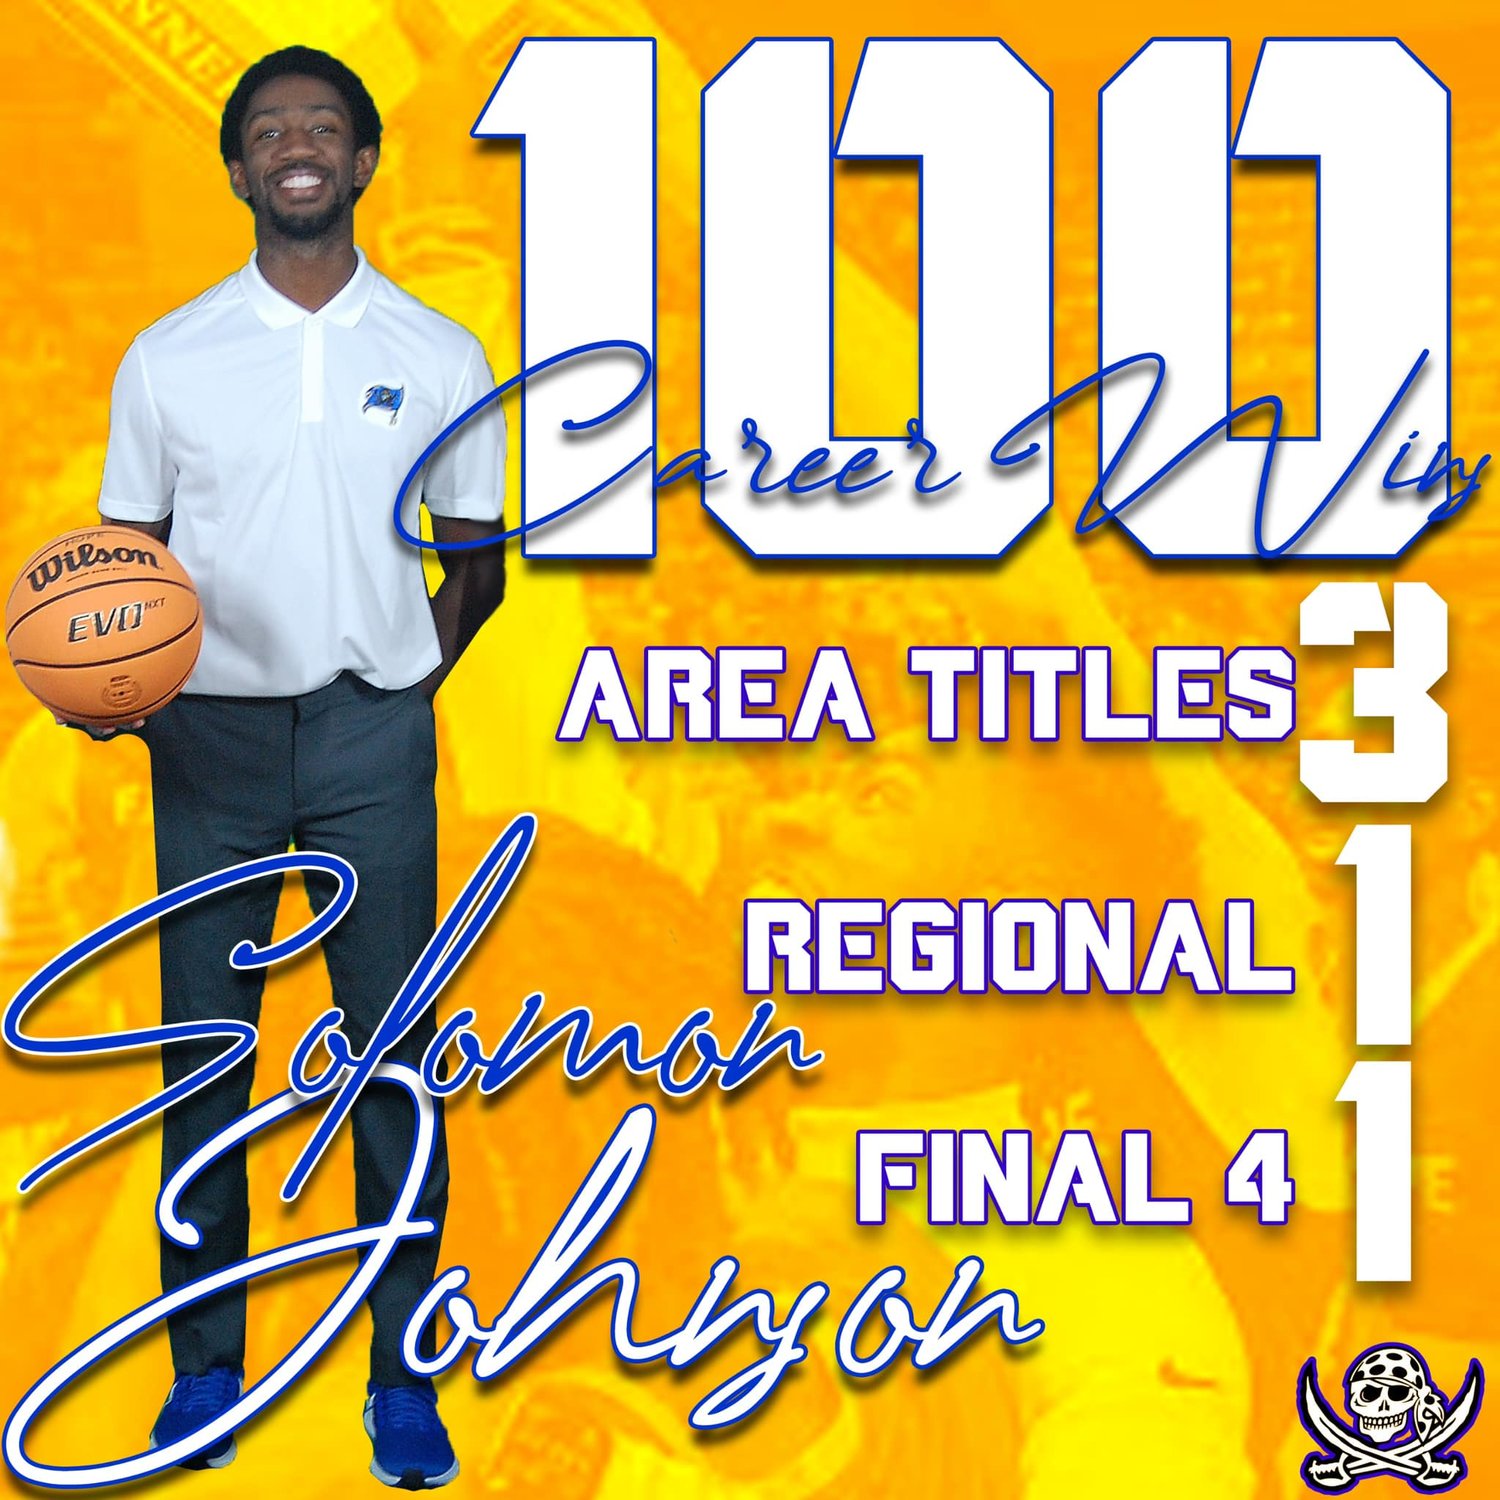 Fairhope head basketball coach Solomon Johnson secured career victory No. 100 after the Pirates took down Smiths Station 68-60 last Friday. Now in his fifth season as the Fairhope head coach, the Pirates have won the last three Class 7A Area 2 championships in a row.